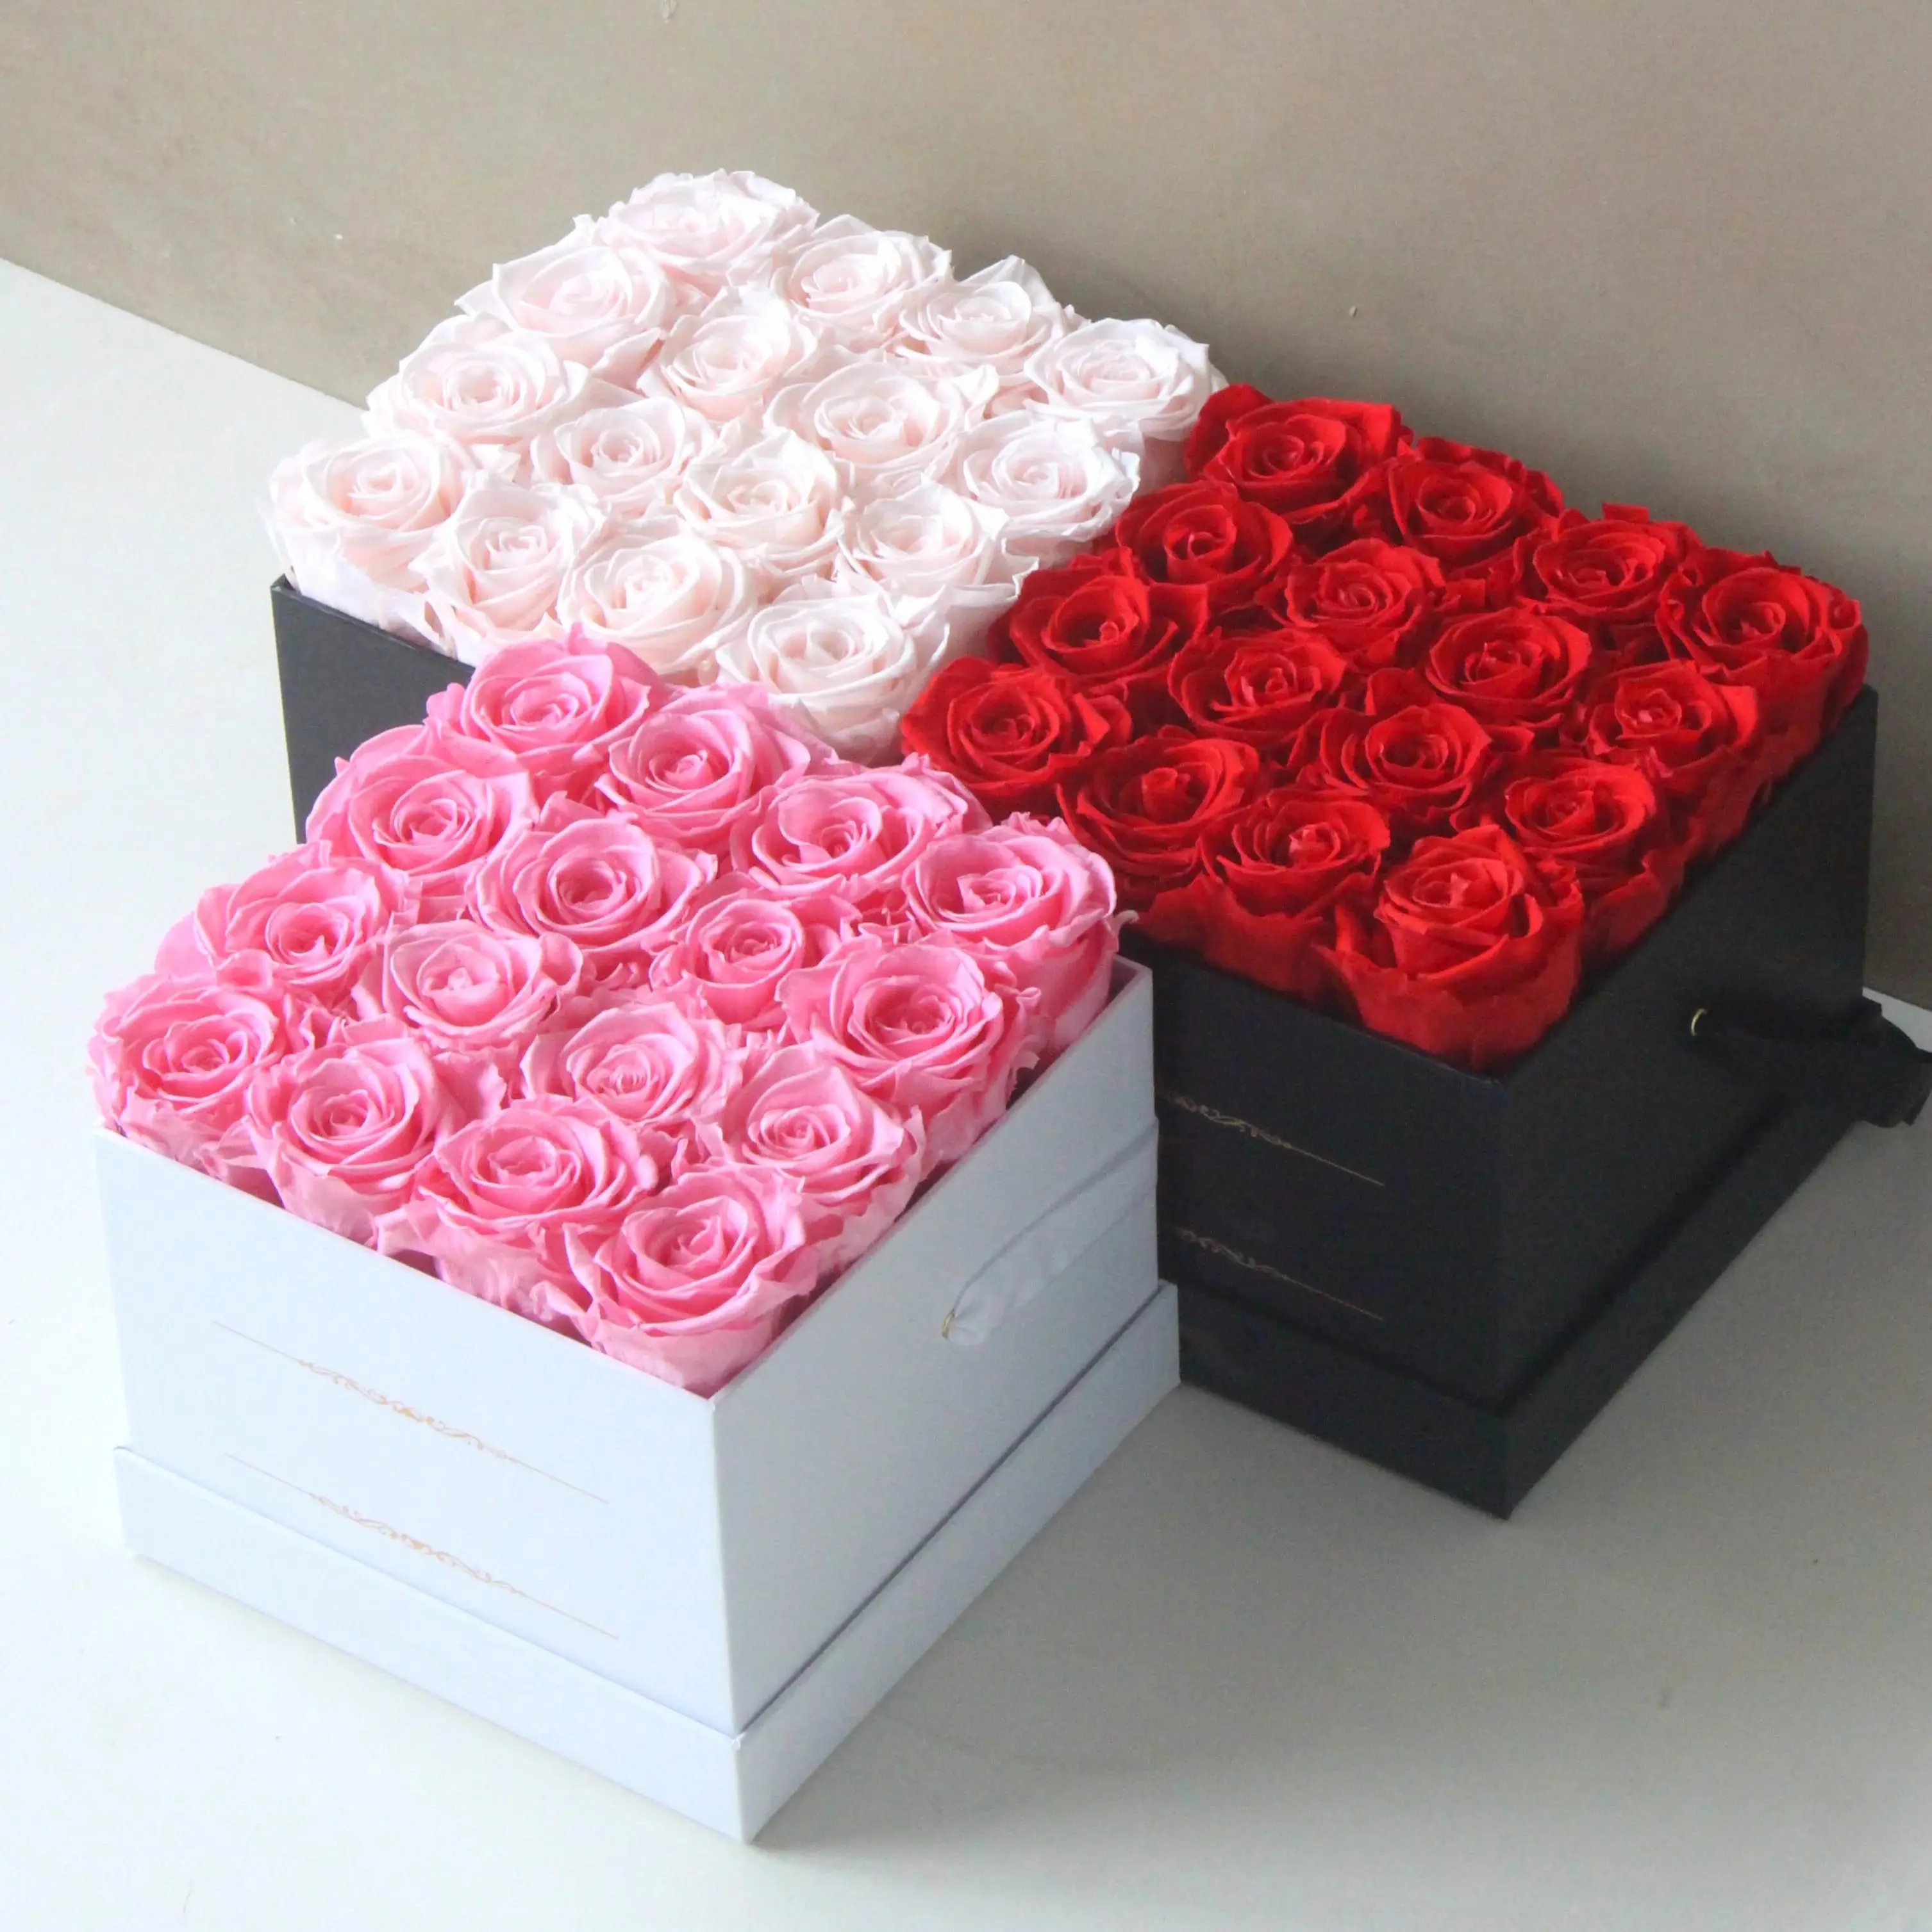 Mother's Day Valentine's Day Gifts forever eternal preserved roses forever flowers everlasting arrangement in box